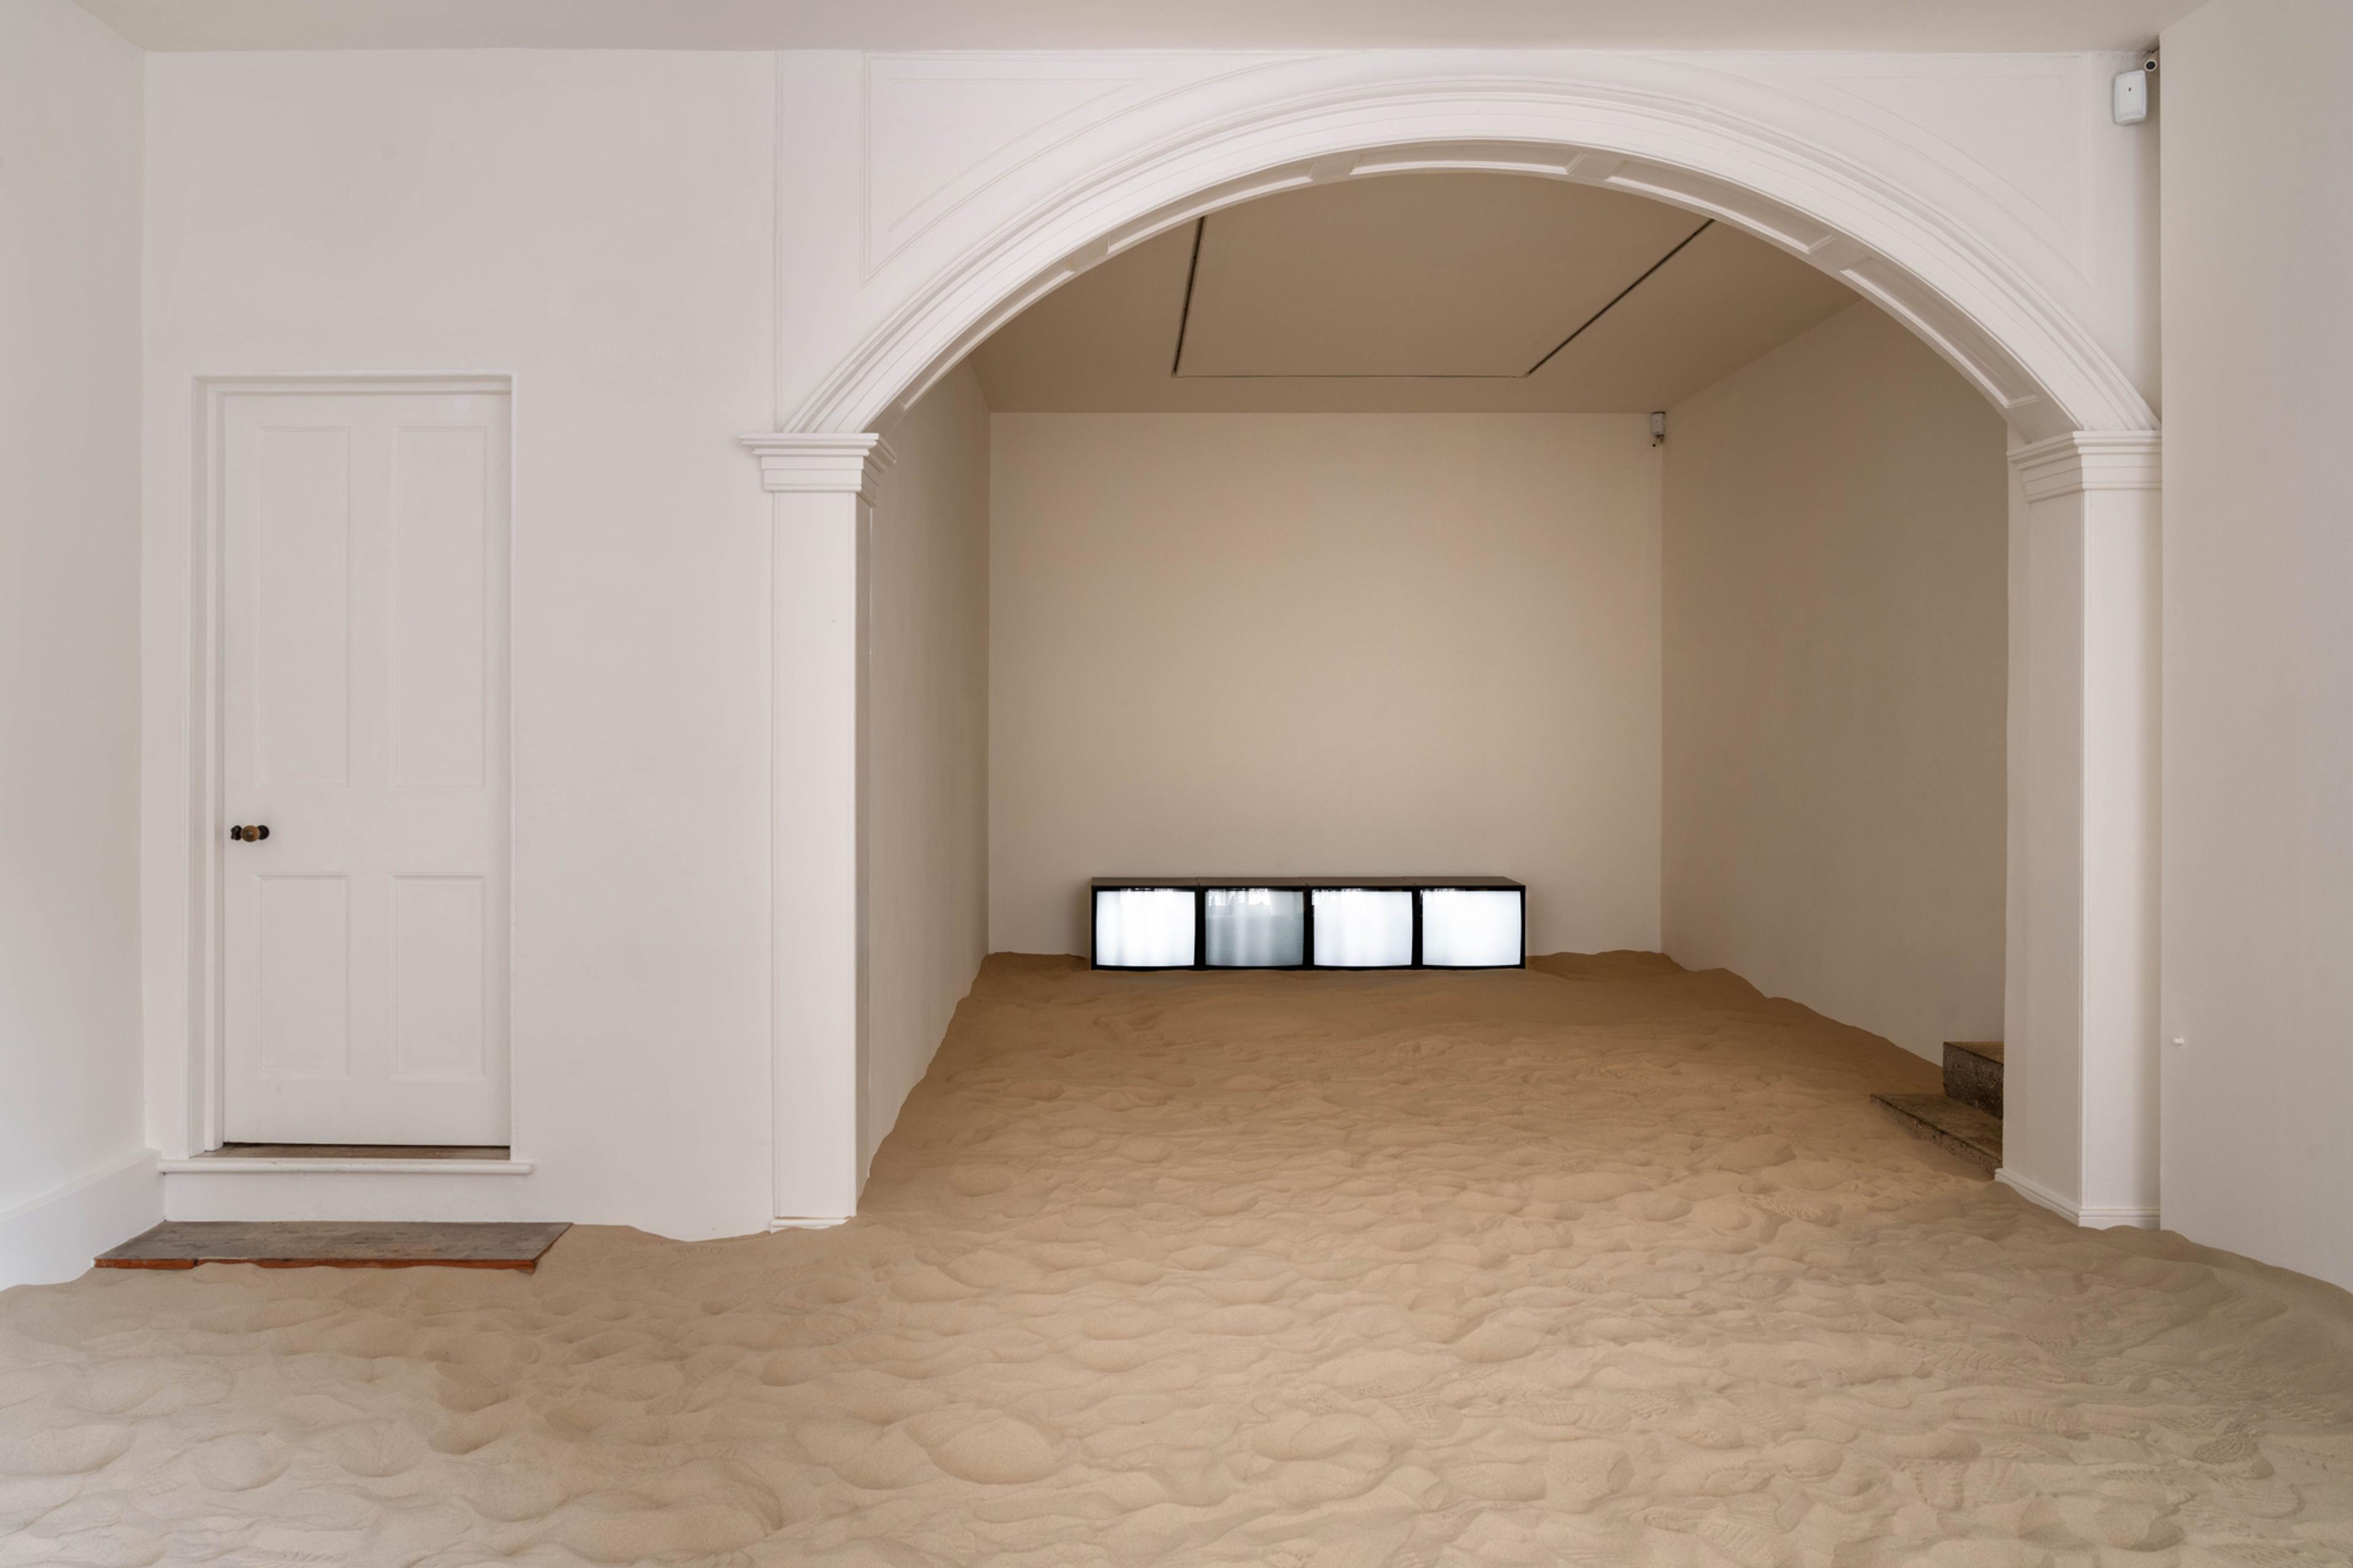 Lutz Bacher, The Book of Sand, 2011–12 and What Are You Thinking, 2011